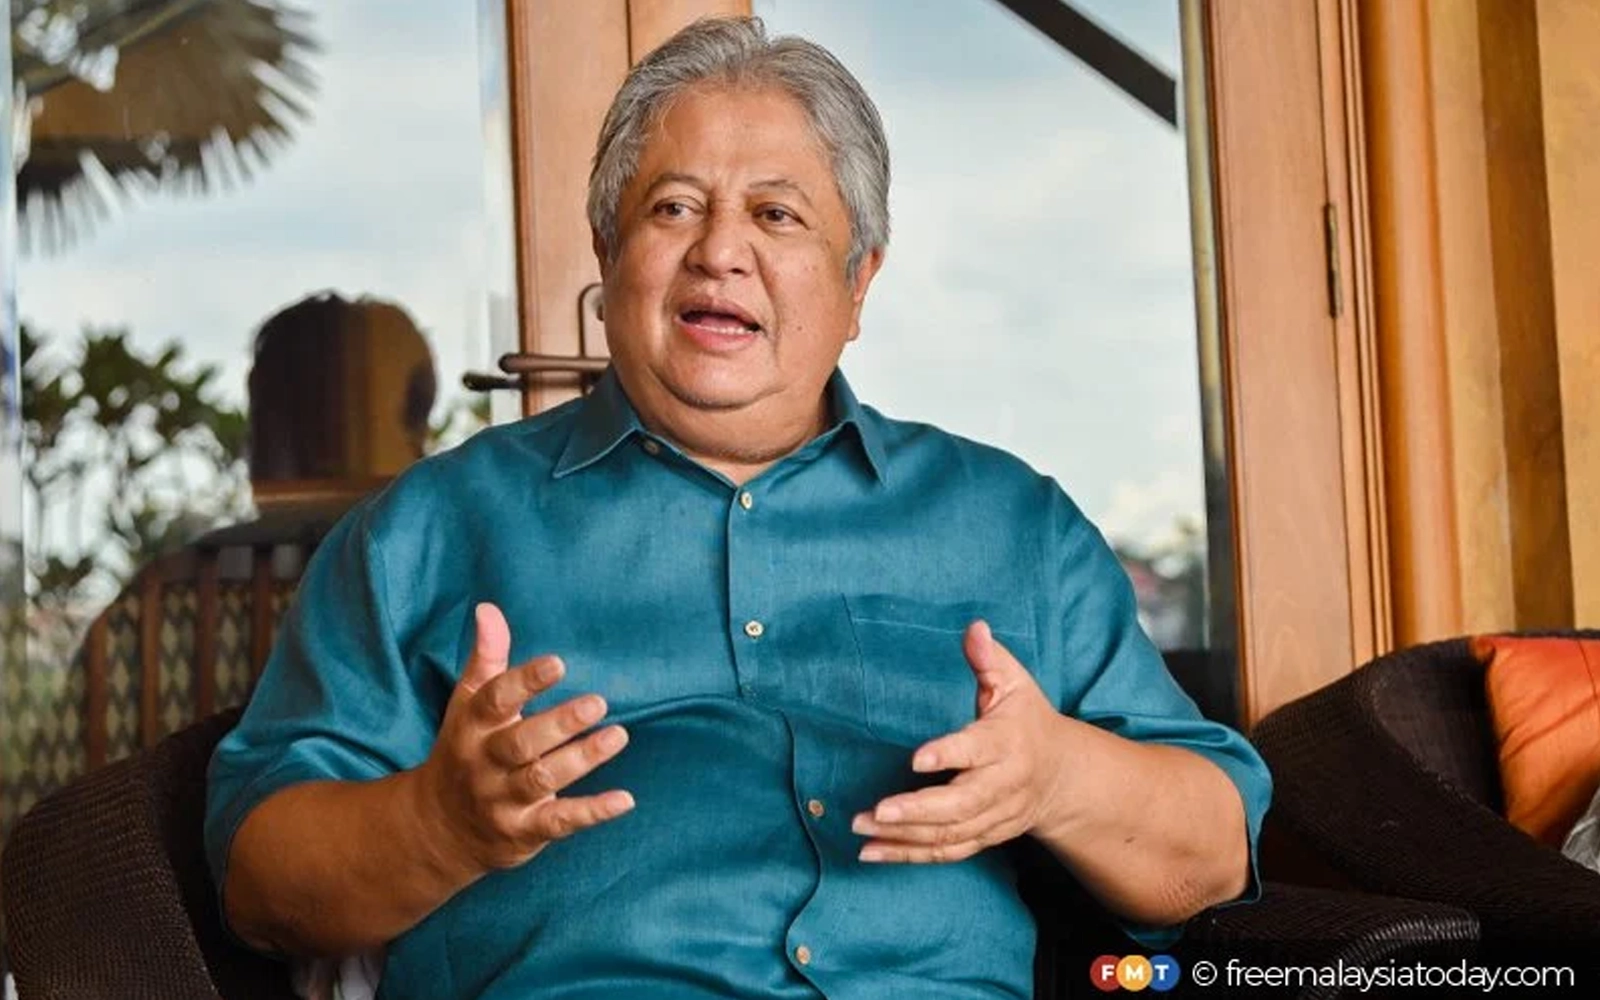 rm50 for minor name error at check-in ridiculous, zaid tells mavcom